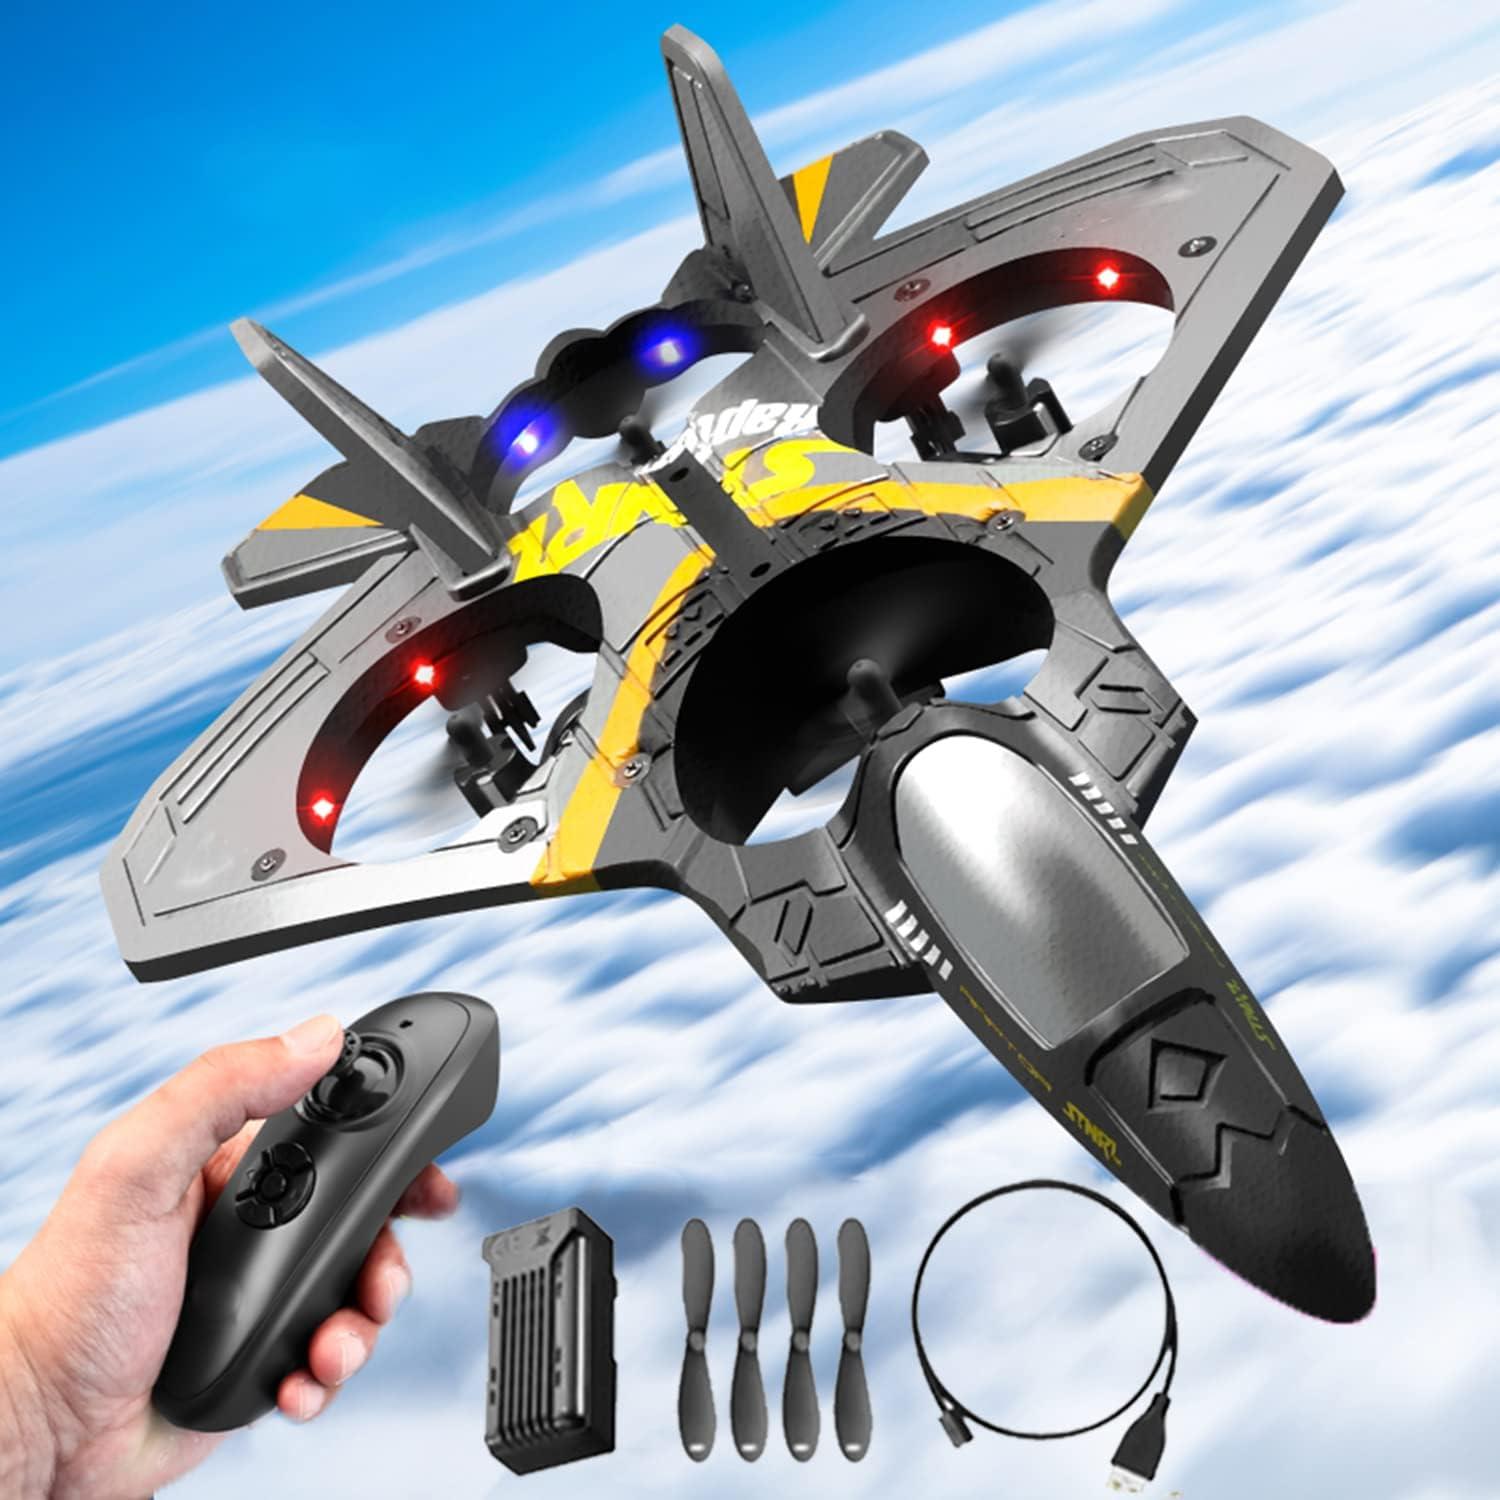 Remote Control Airplane With 360 Stunt Spin Remote & Light:  Those looking for an exciting RC airplane should consider this model with 360 stunt spin and light features.